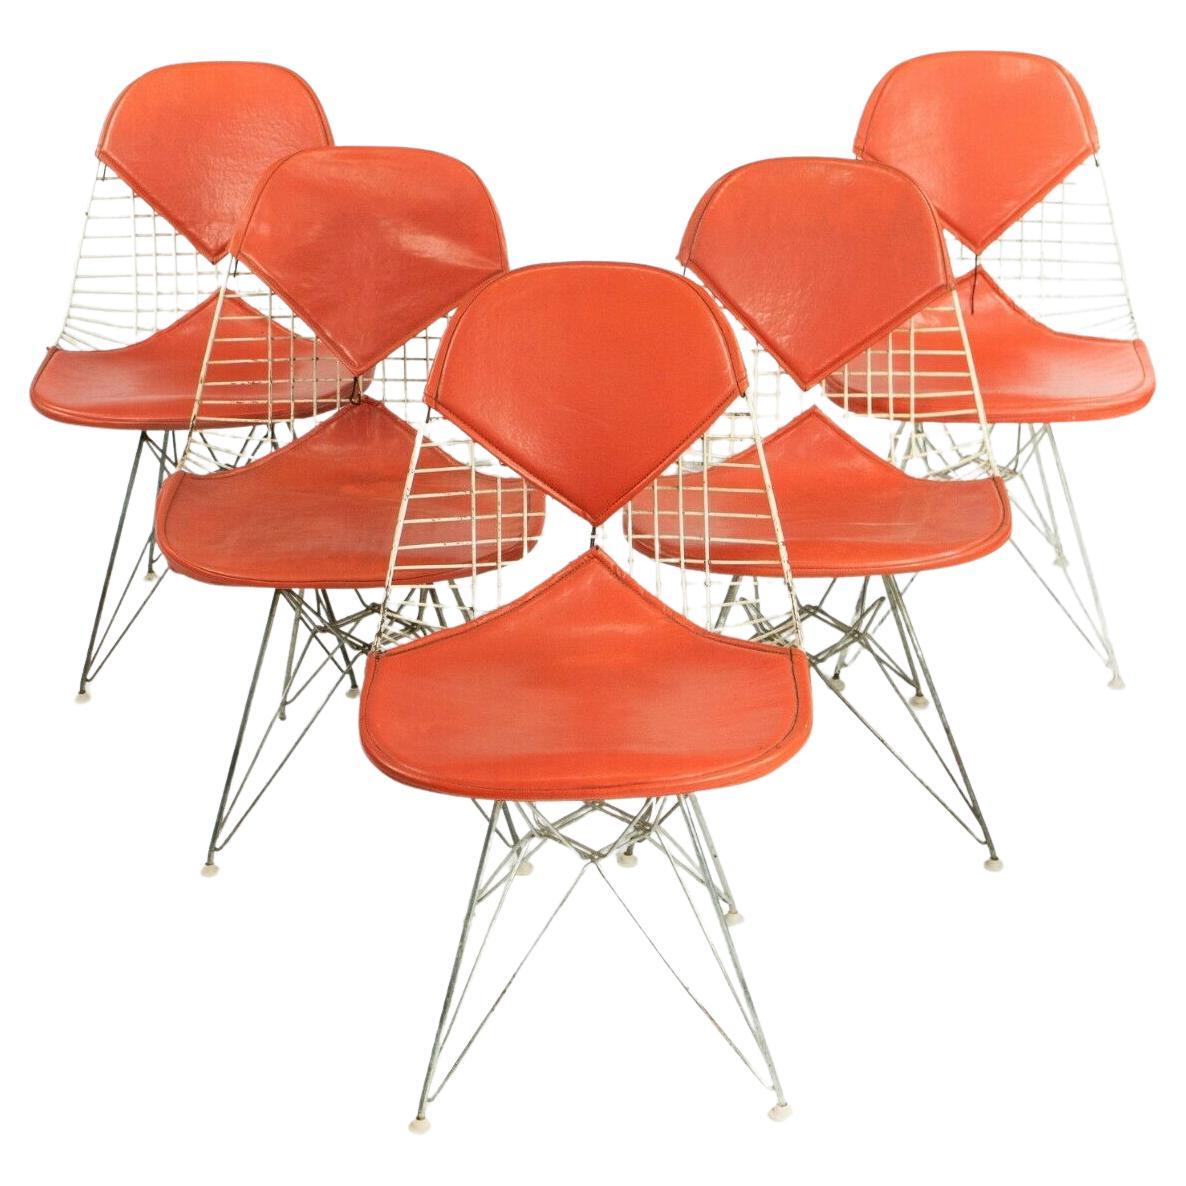 1957 Herman Miller Eames DKR-2 Dining / Side Chairs Set of Five with Orange Pads For Sale